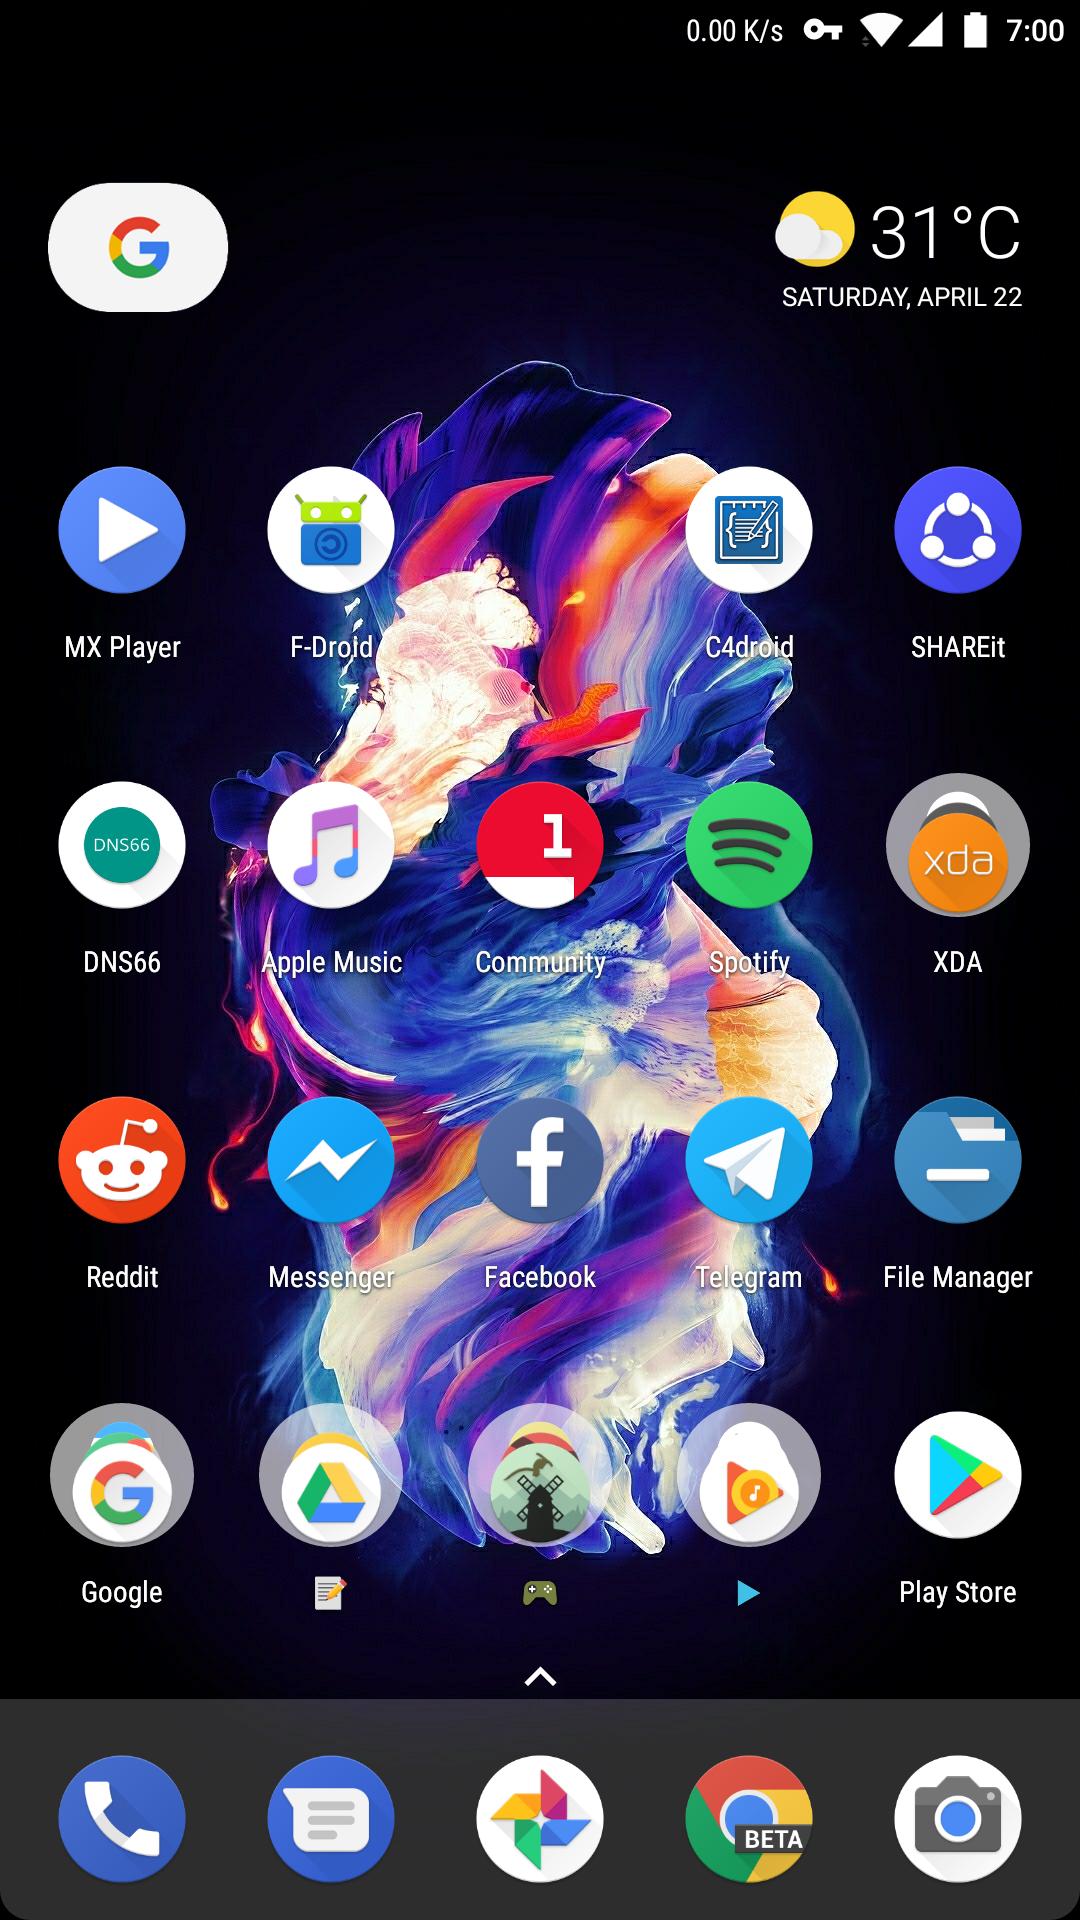 Oneplus Included Two Hidden Wallpapers In Their Launcher - Smartphone , HD Wallpaper & Backgrounds